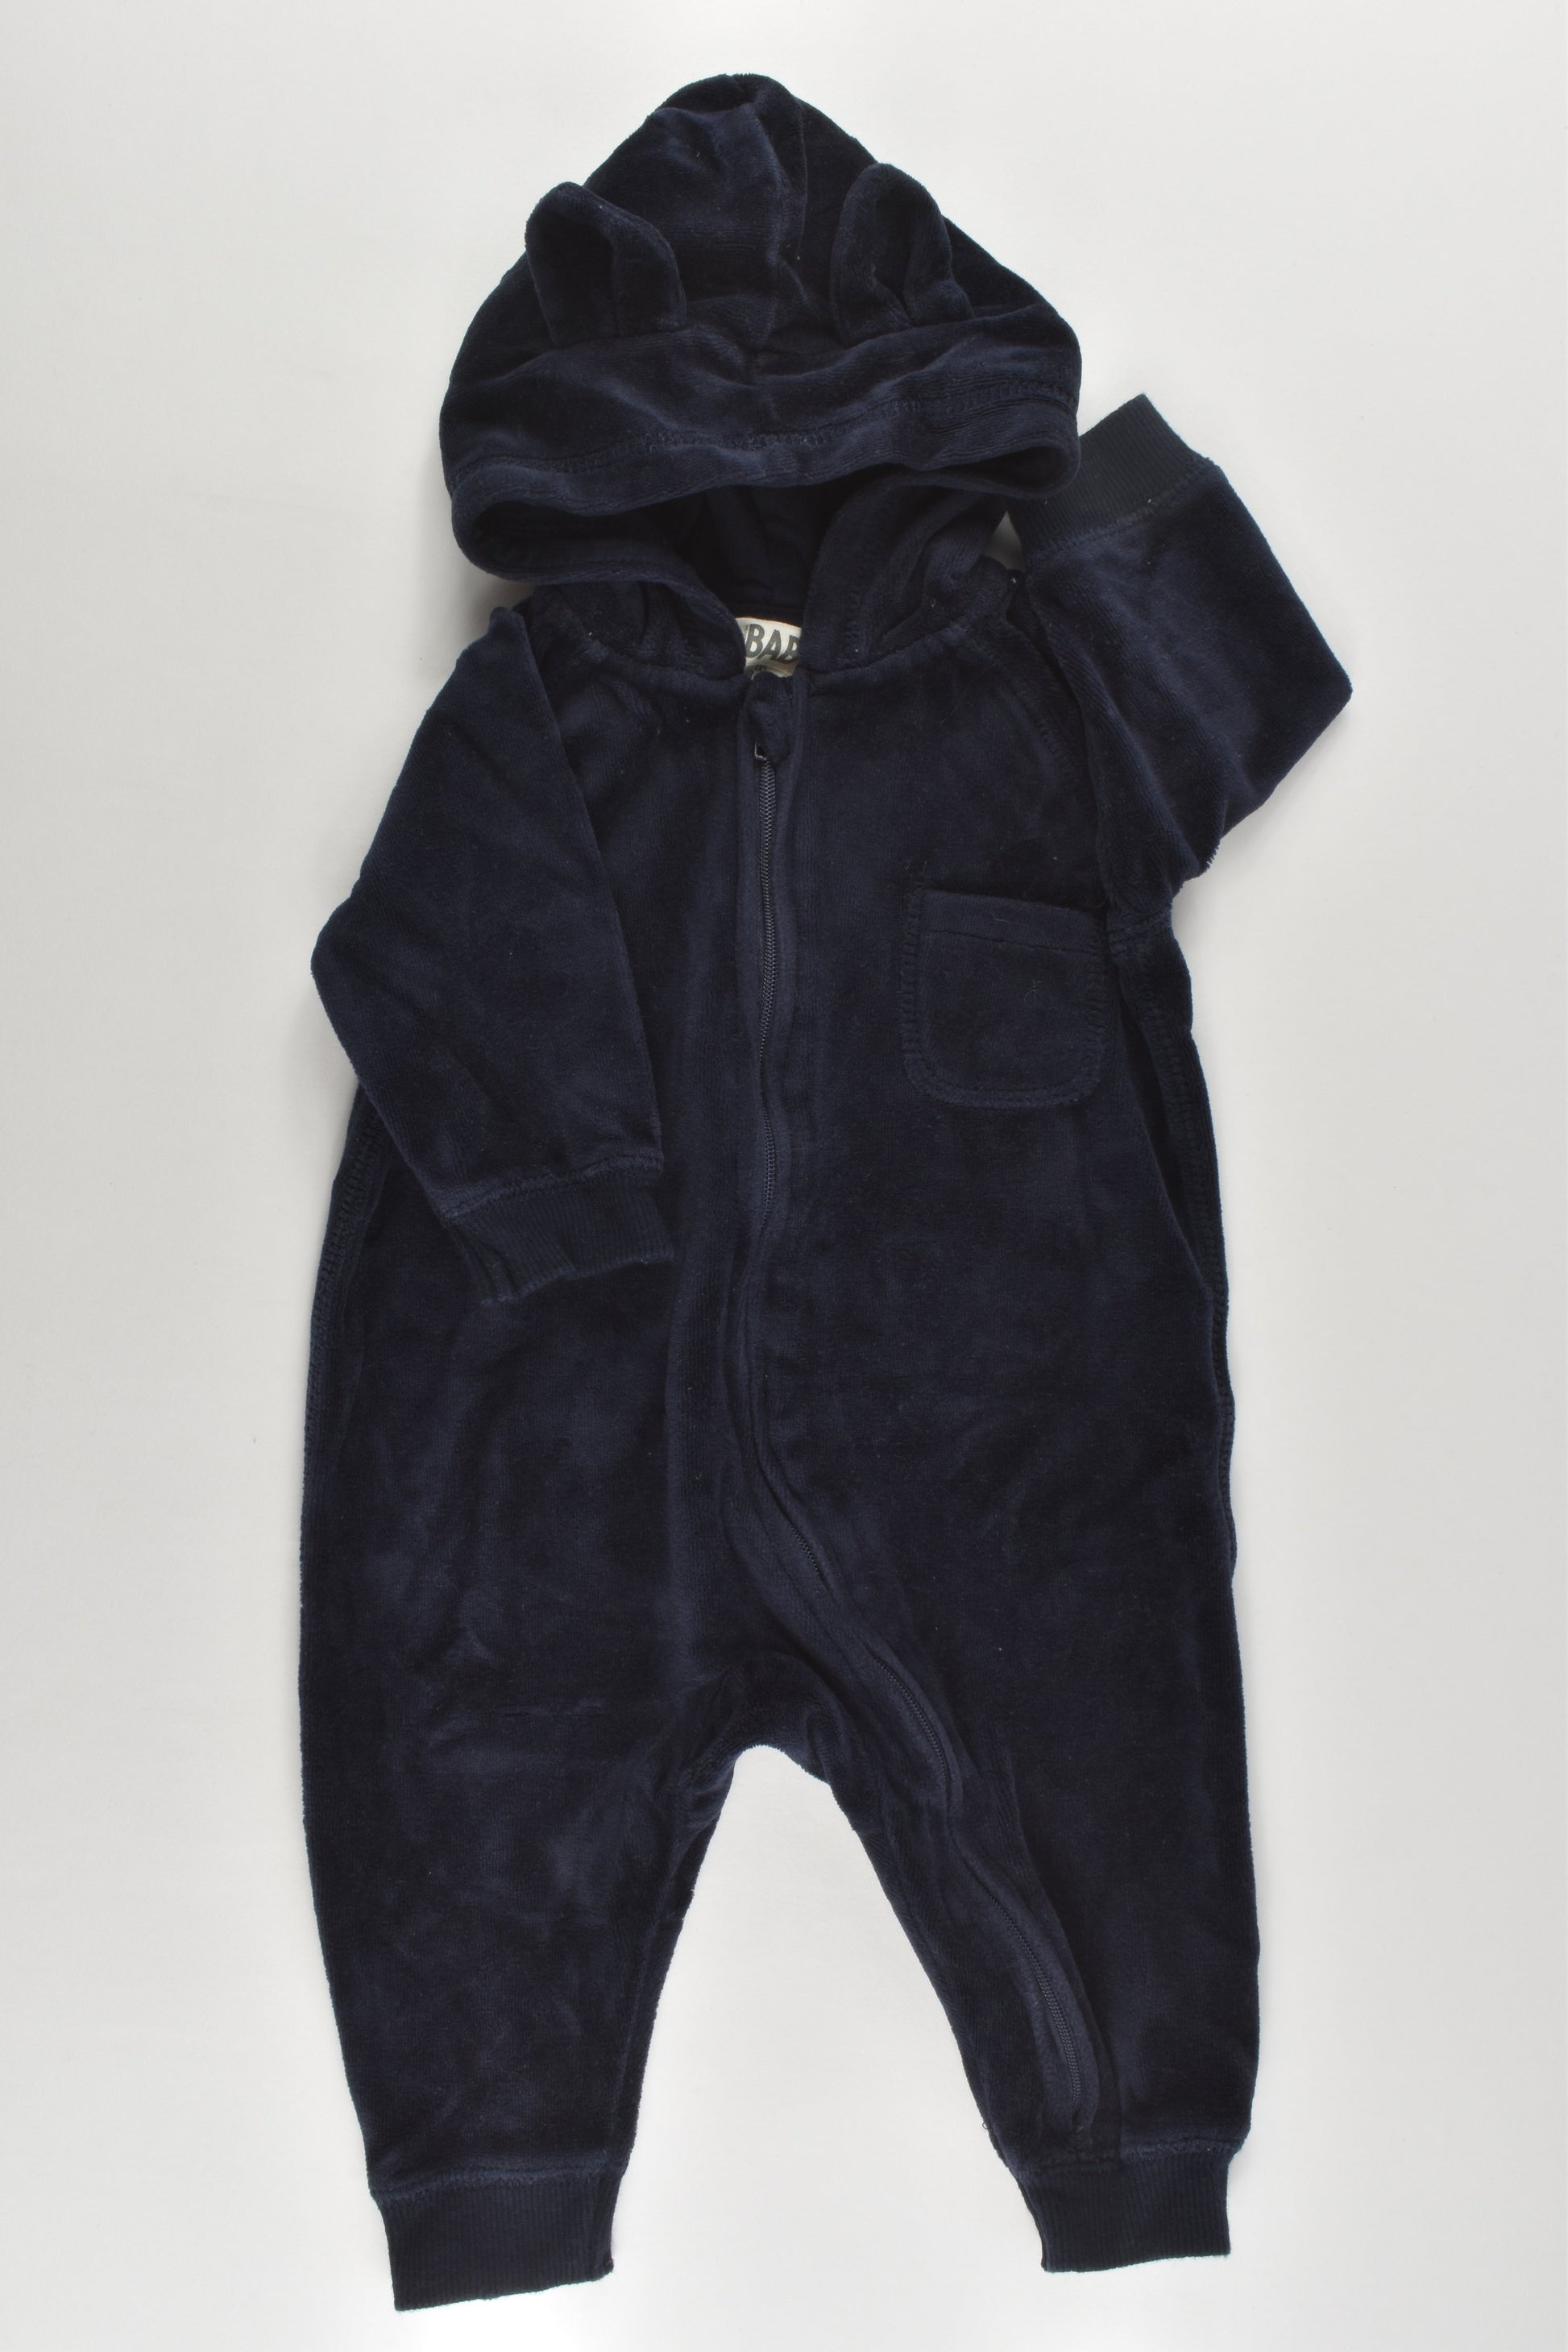 Cotton On Baby Size 00 (3-6 months) Hooded Velour Onesie